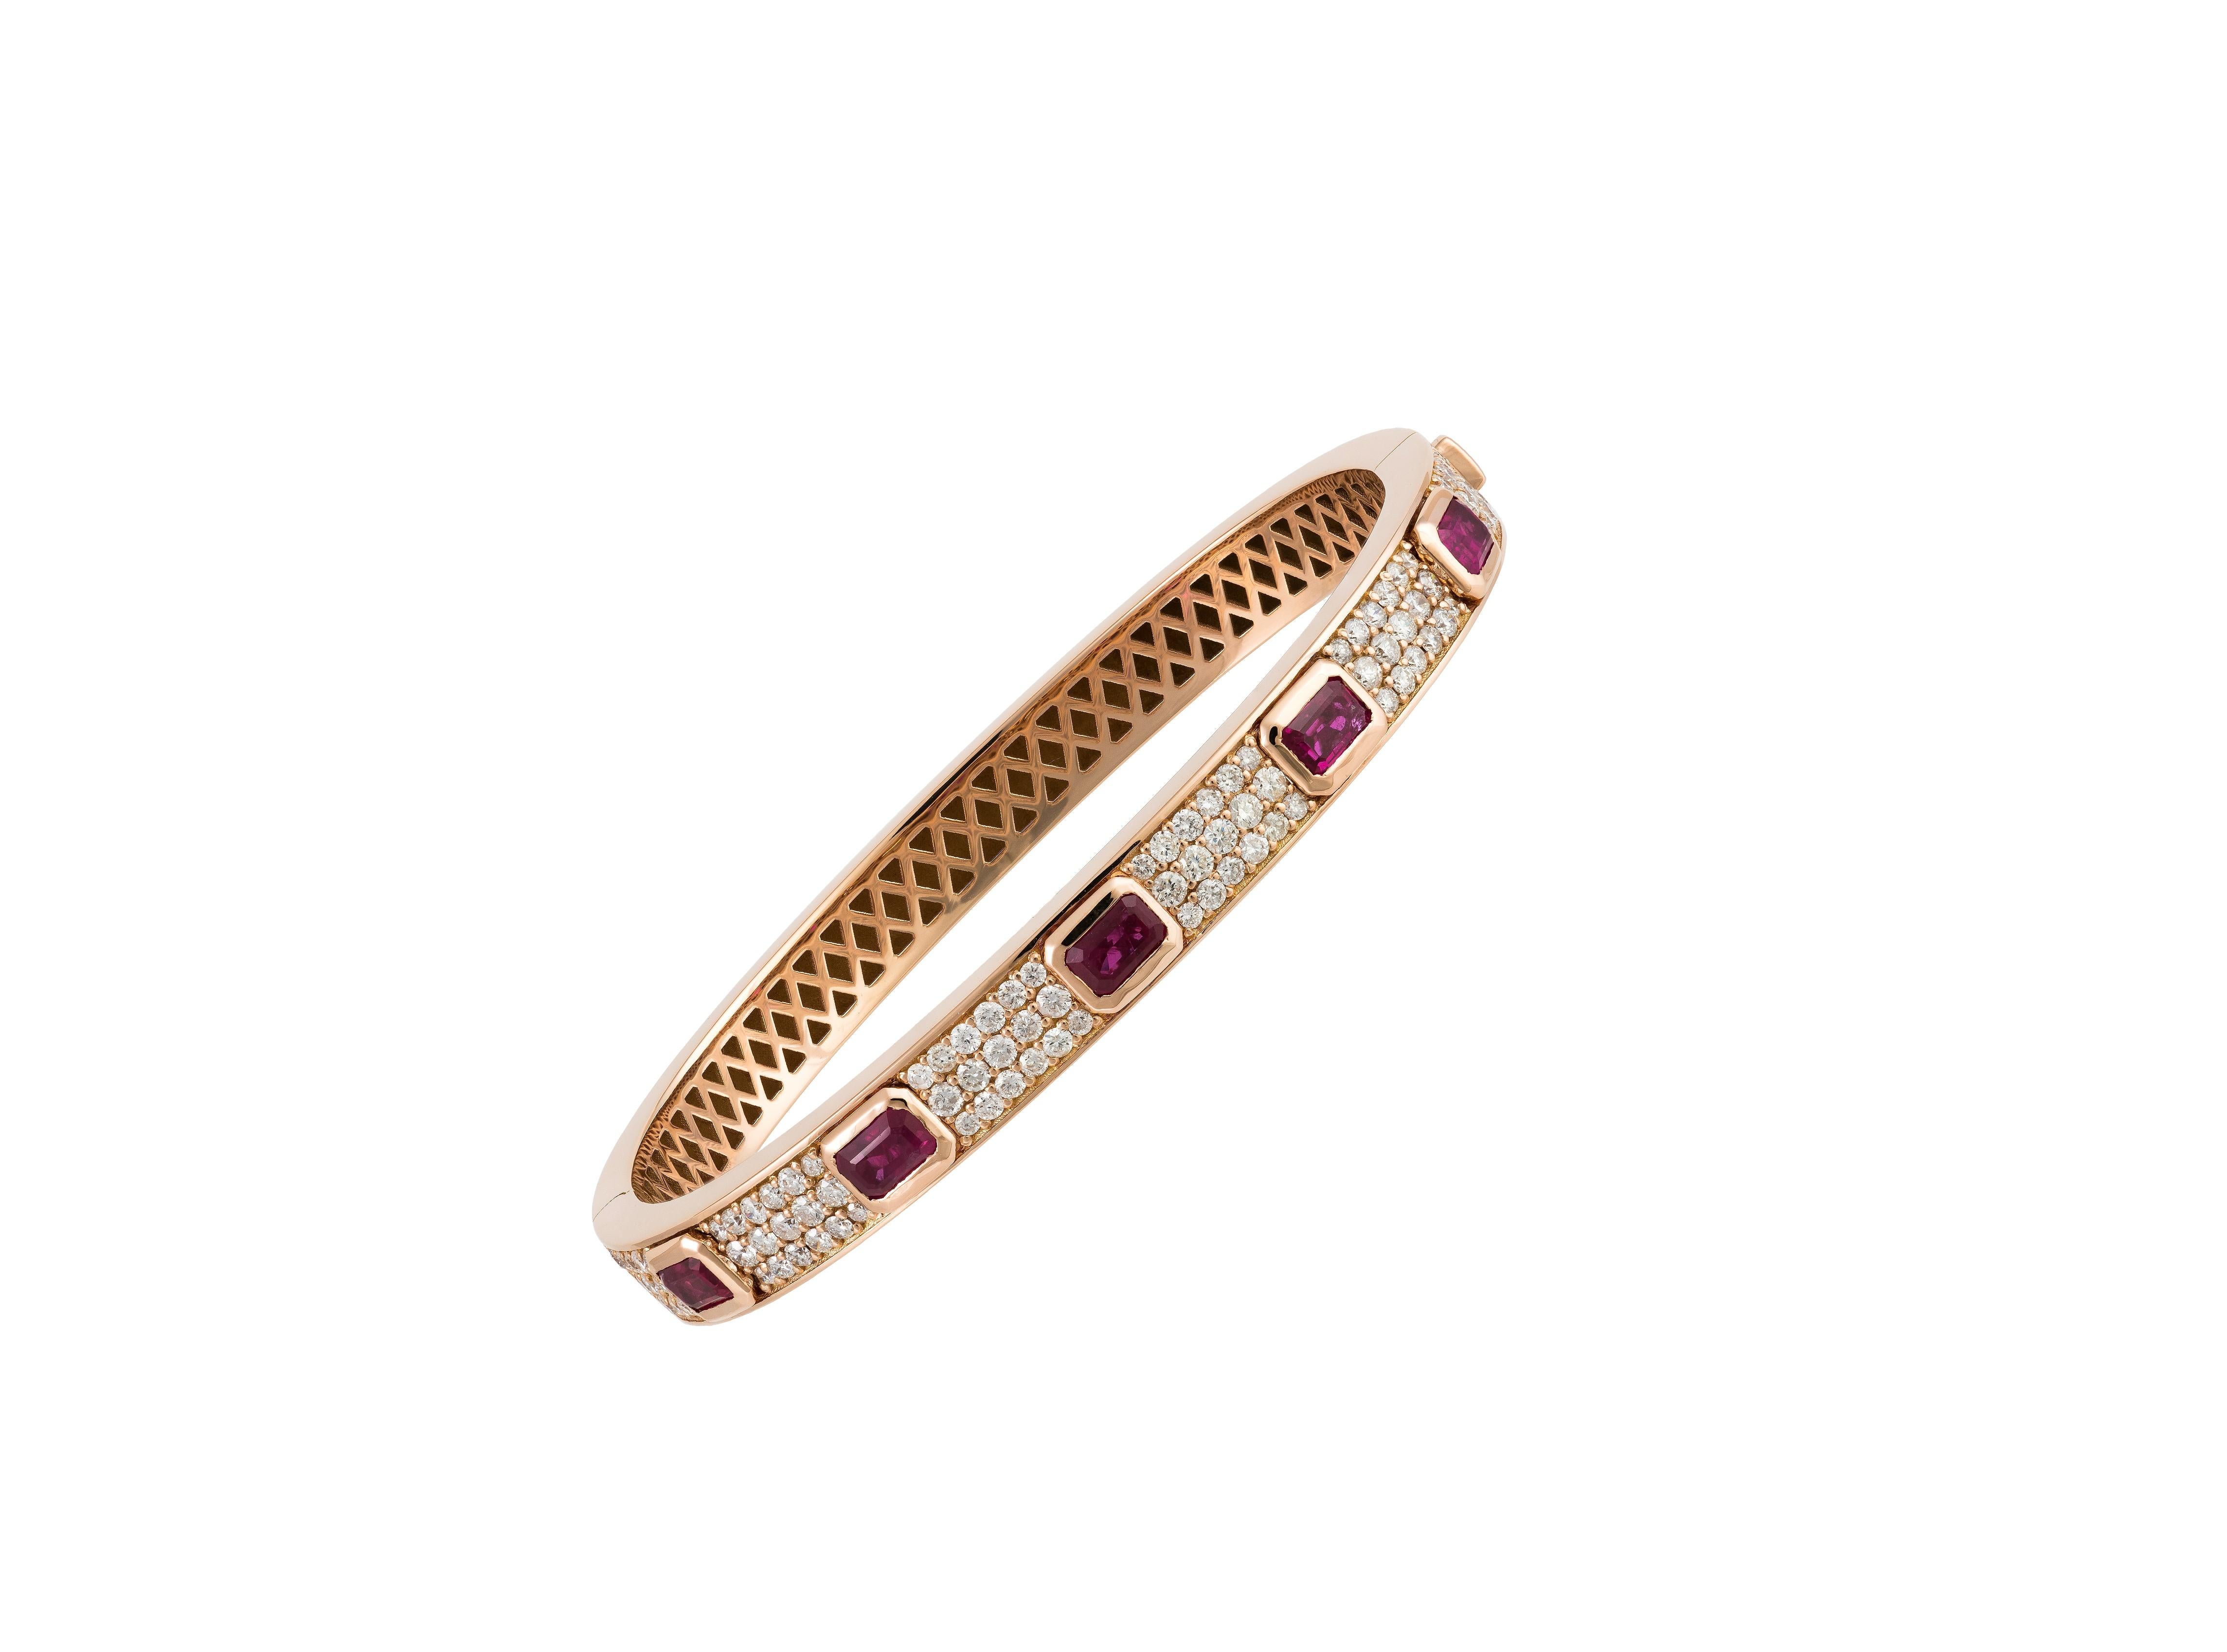 The Following Item we are offering is a Rare Magnificent Radiant 18KT Gold Large Rare Gorgeous Fancy Diamond Ruby Bangle Bracelet. Bracelet is comprised of Beautiful Glittering Rubies and Diamonds T.C.W. Approx 4CTS!!! This Gorgeous Bangle is a Rare